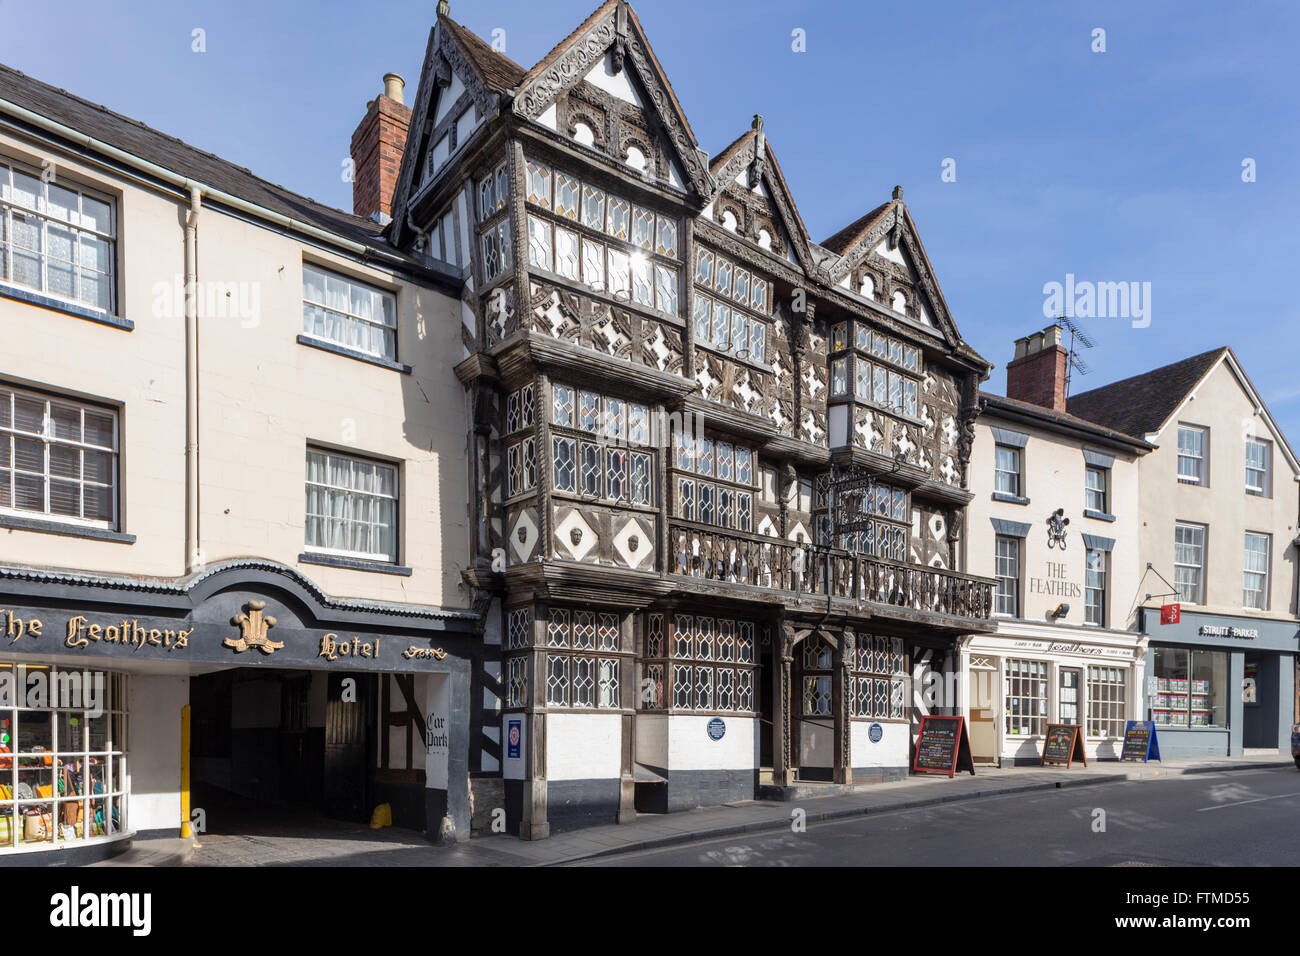 The Feathers Hotel in the Bull Ring, Ludlow, Shropshire, England, UK Stock Photo